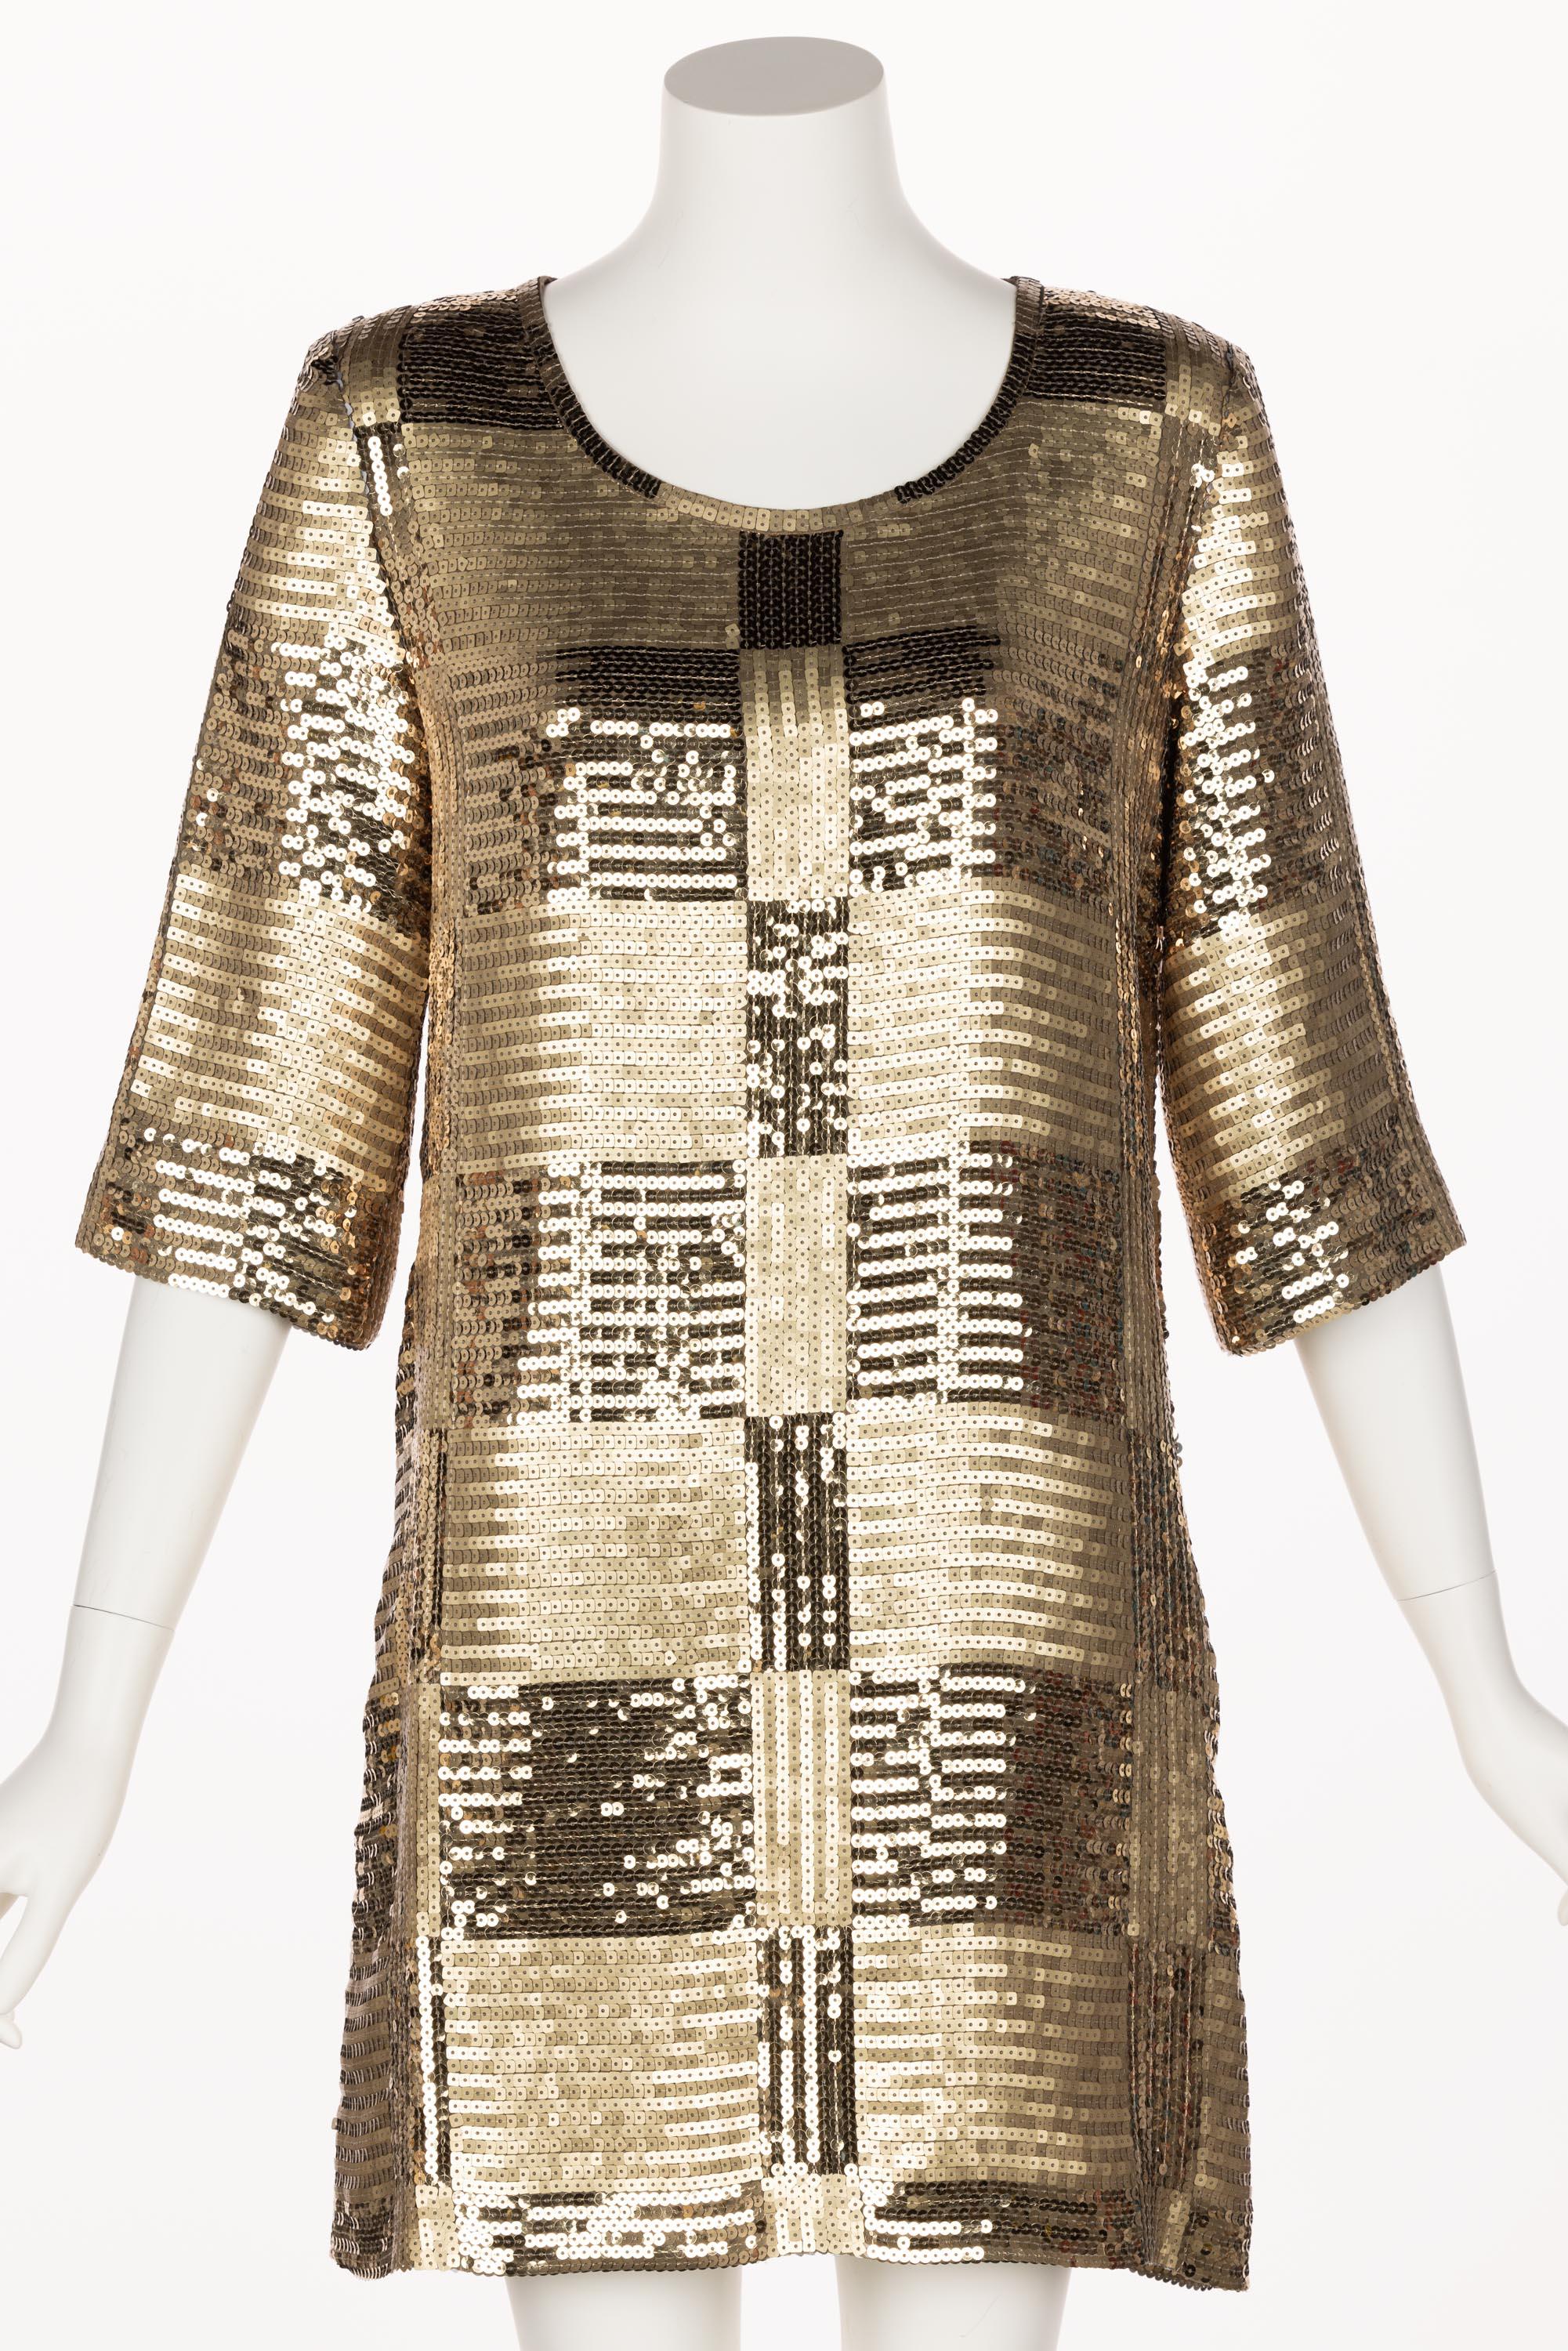 The designer of this tunic dress is unknown, but that makes it no less spectacular. Done in alternating boxes of matte and shiny gold sequins that create a lattice design, this dazzling dress is playful and sophisticated at once. The bodice begins